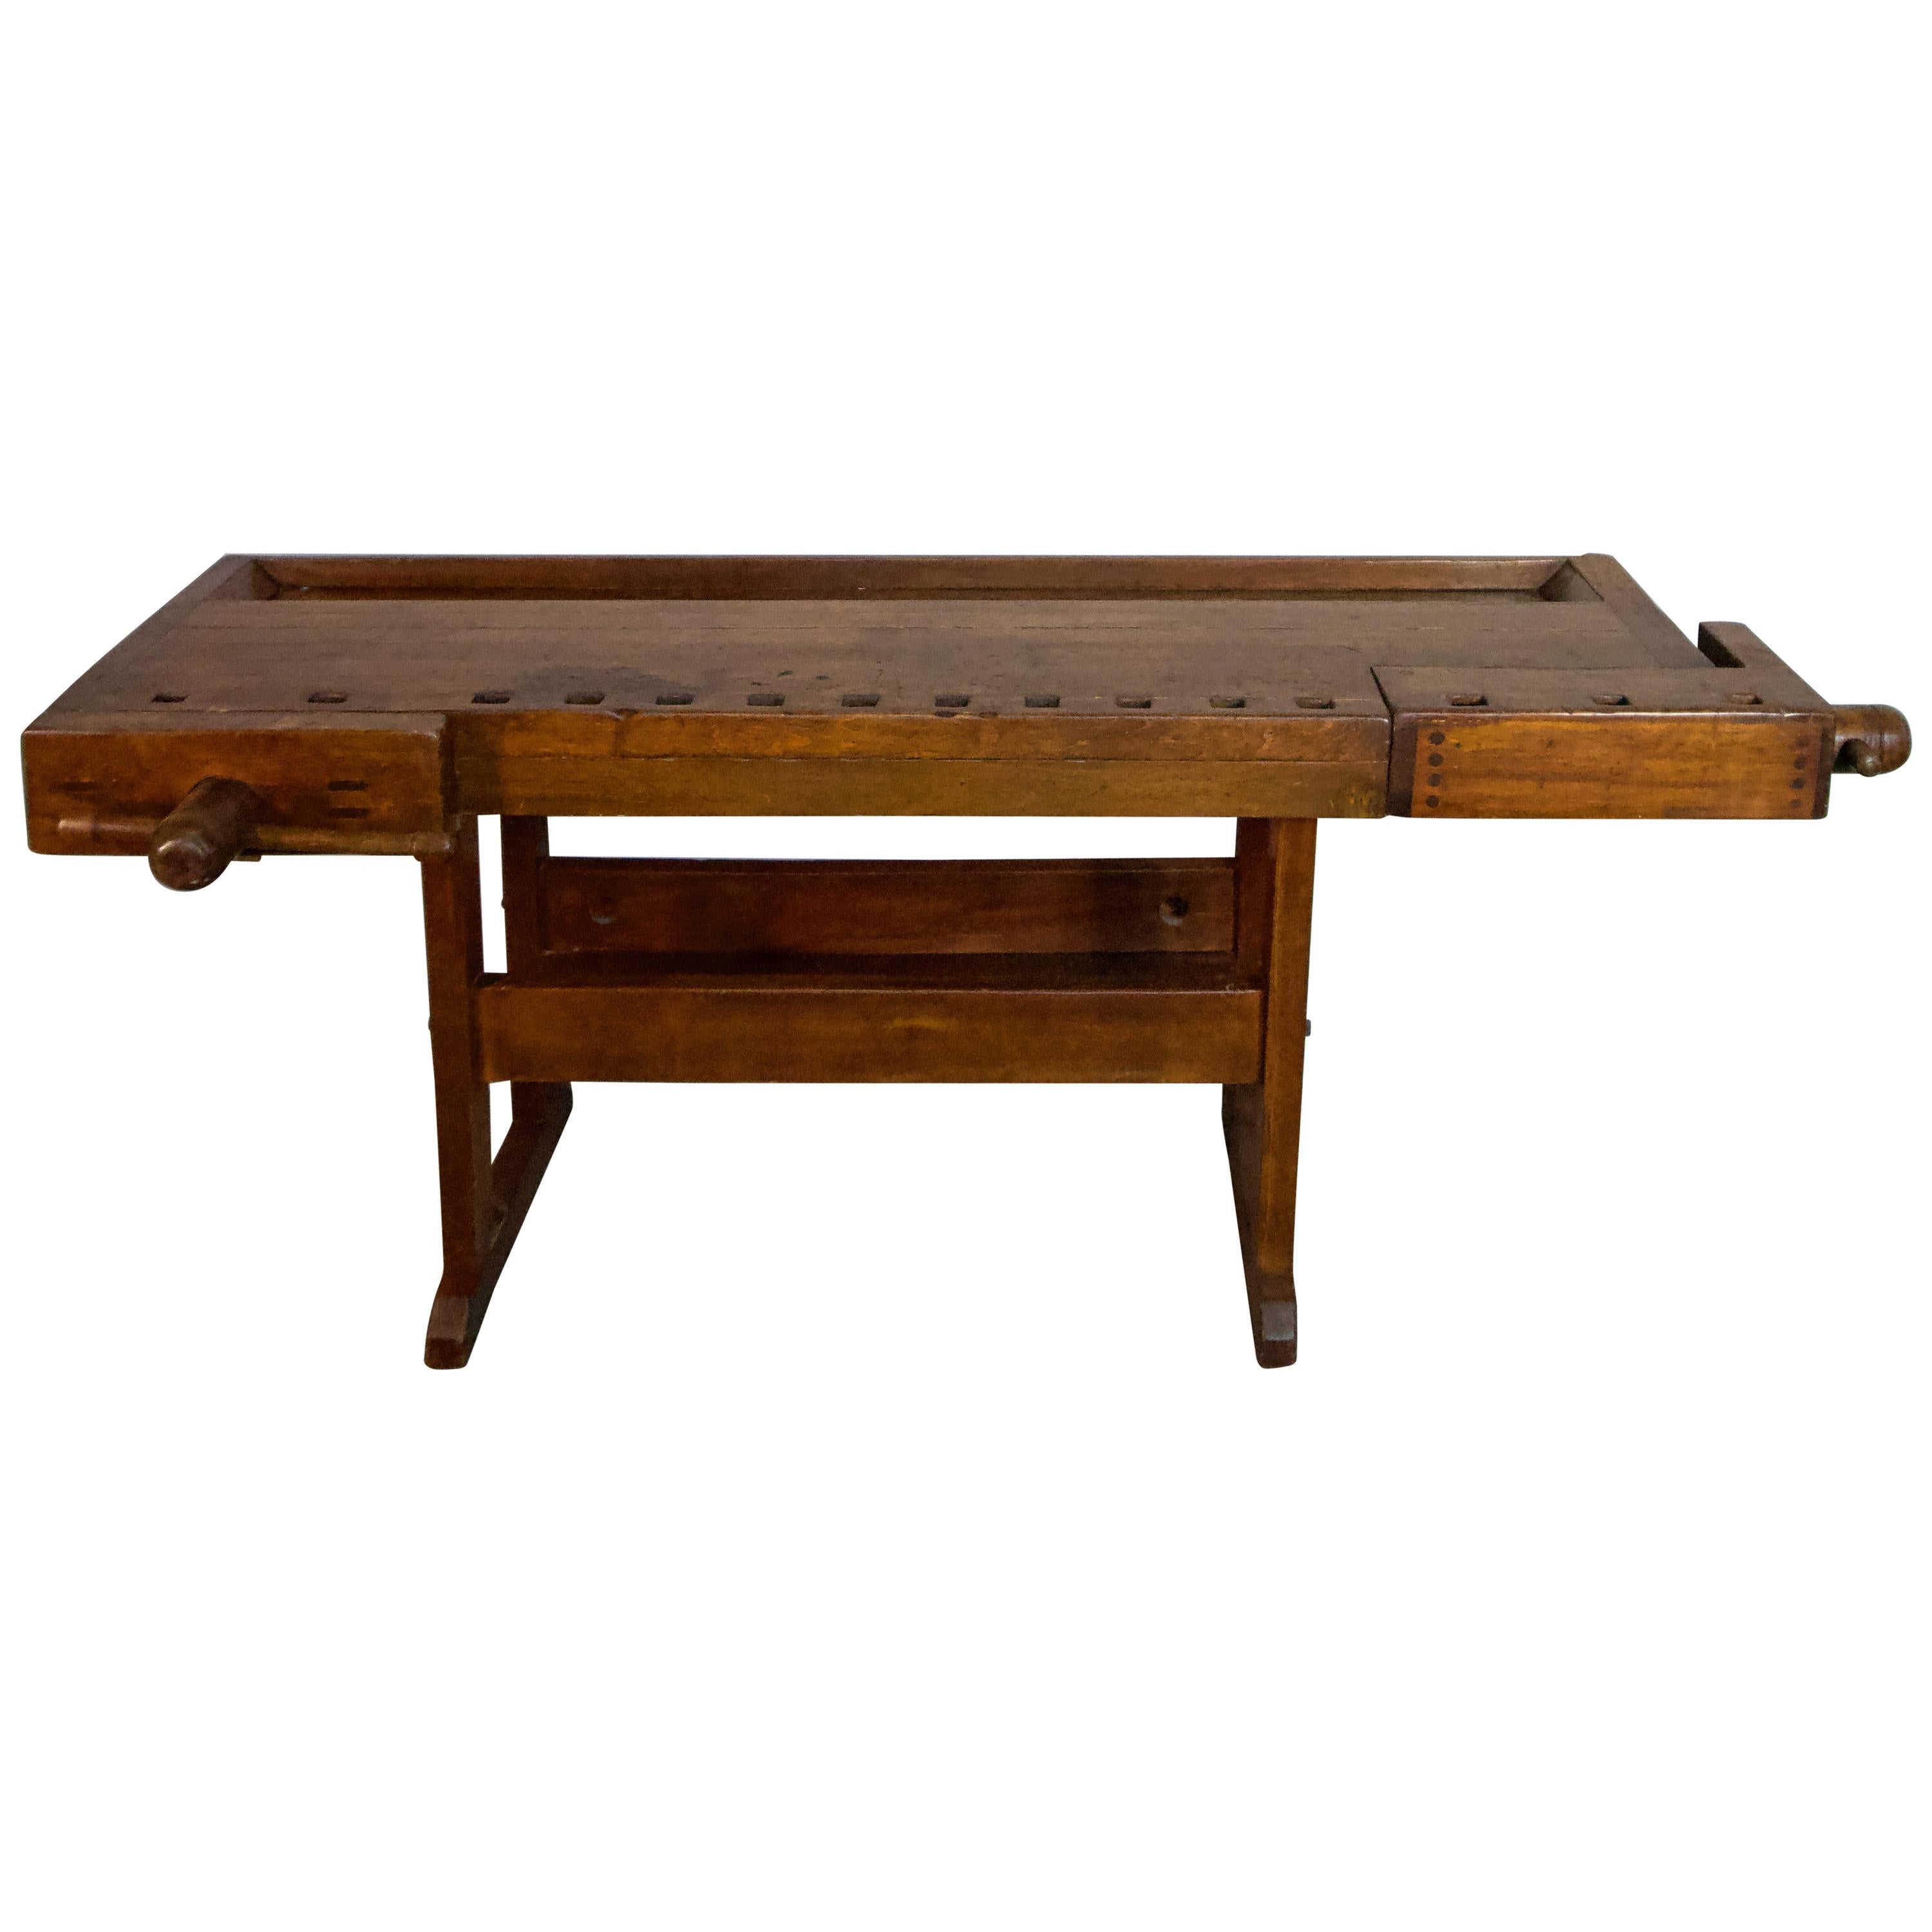 Cabinet Makers Work Bench, as Sideboard, Serving Table or Bar For Sale